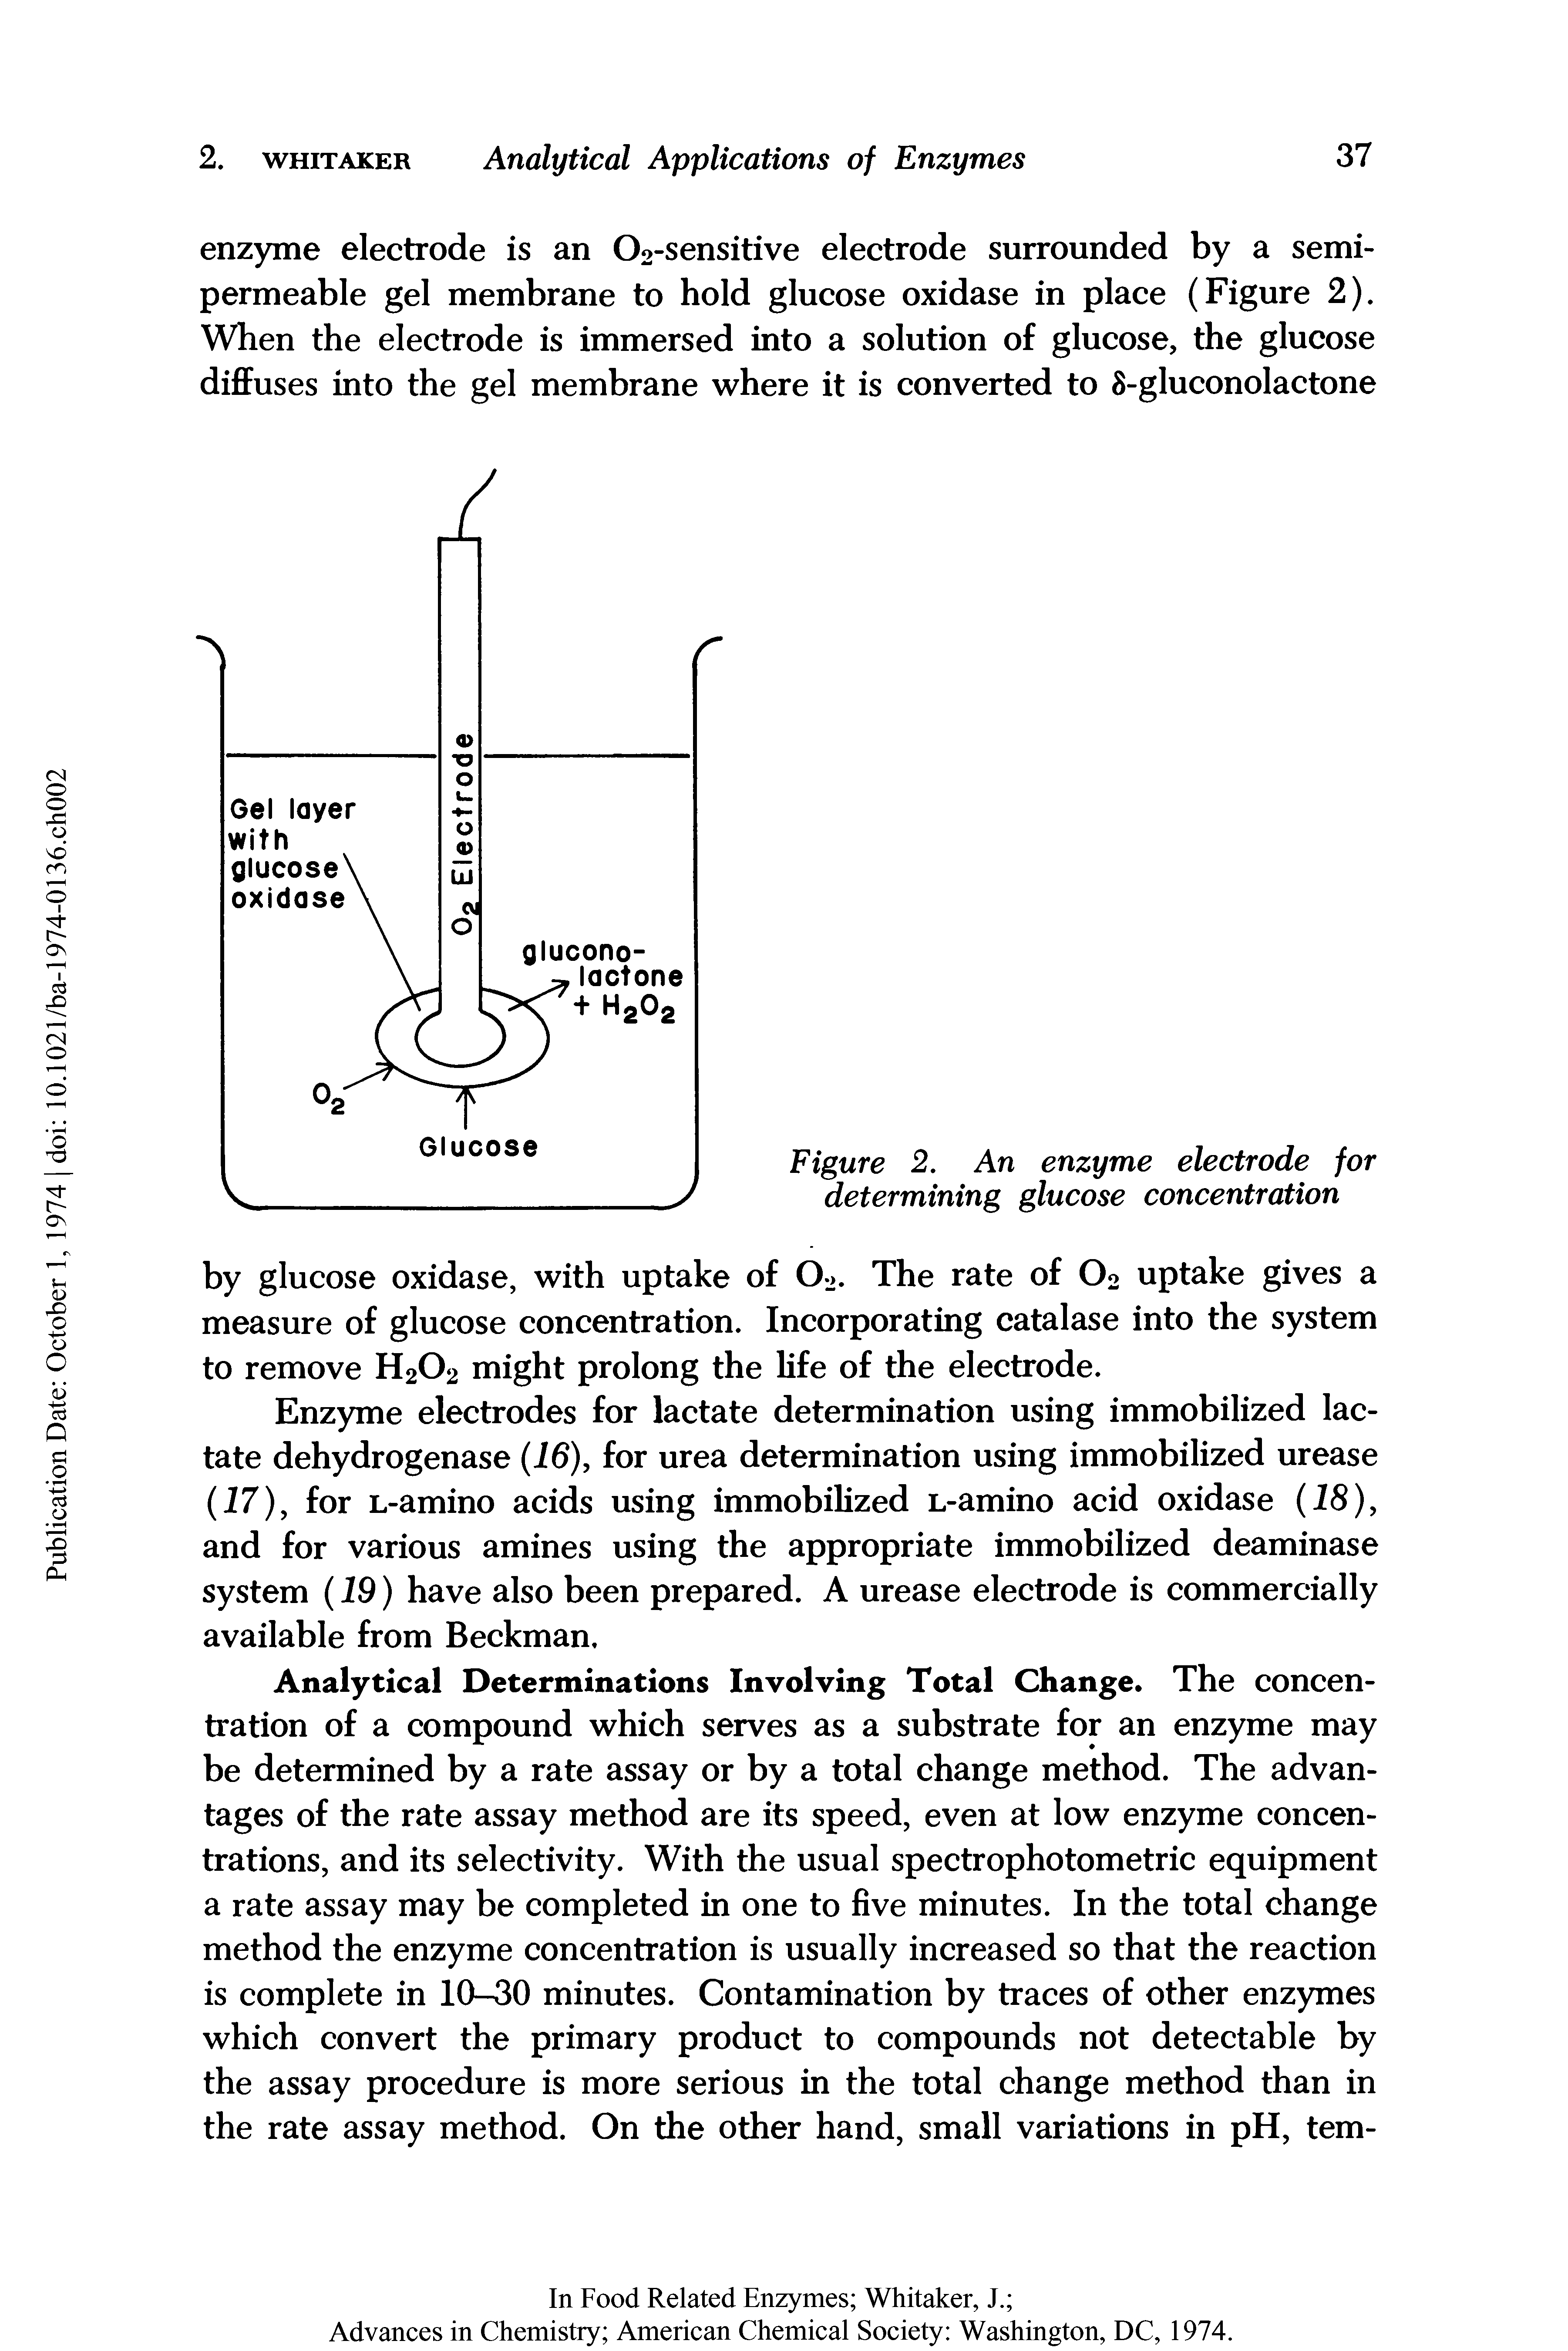 Figure 2. An enzyme electrode for determining glucose concentration...